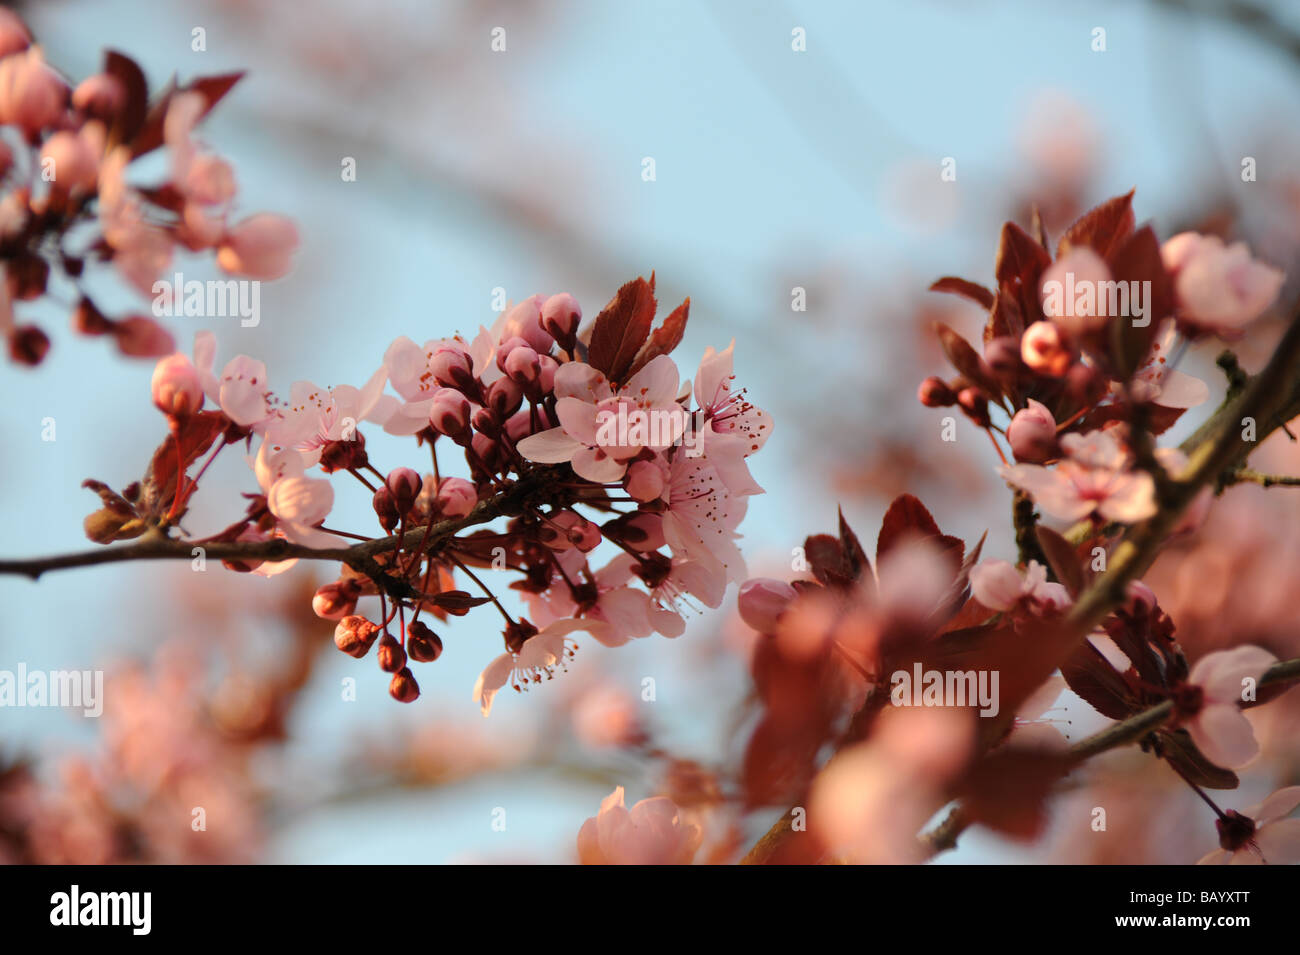 Blossoms of a cherrytree Stock Photo